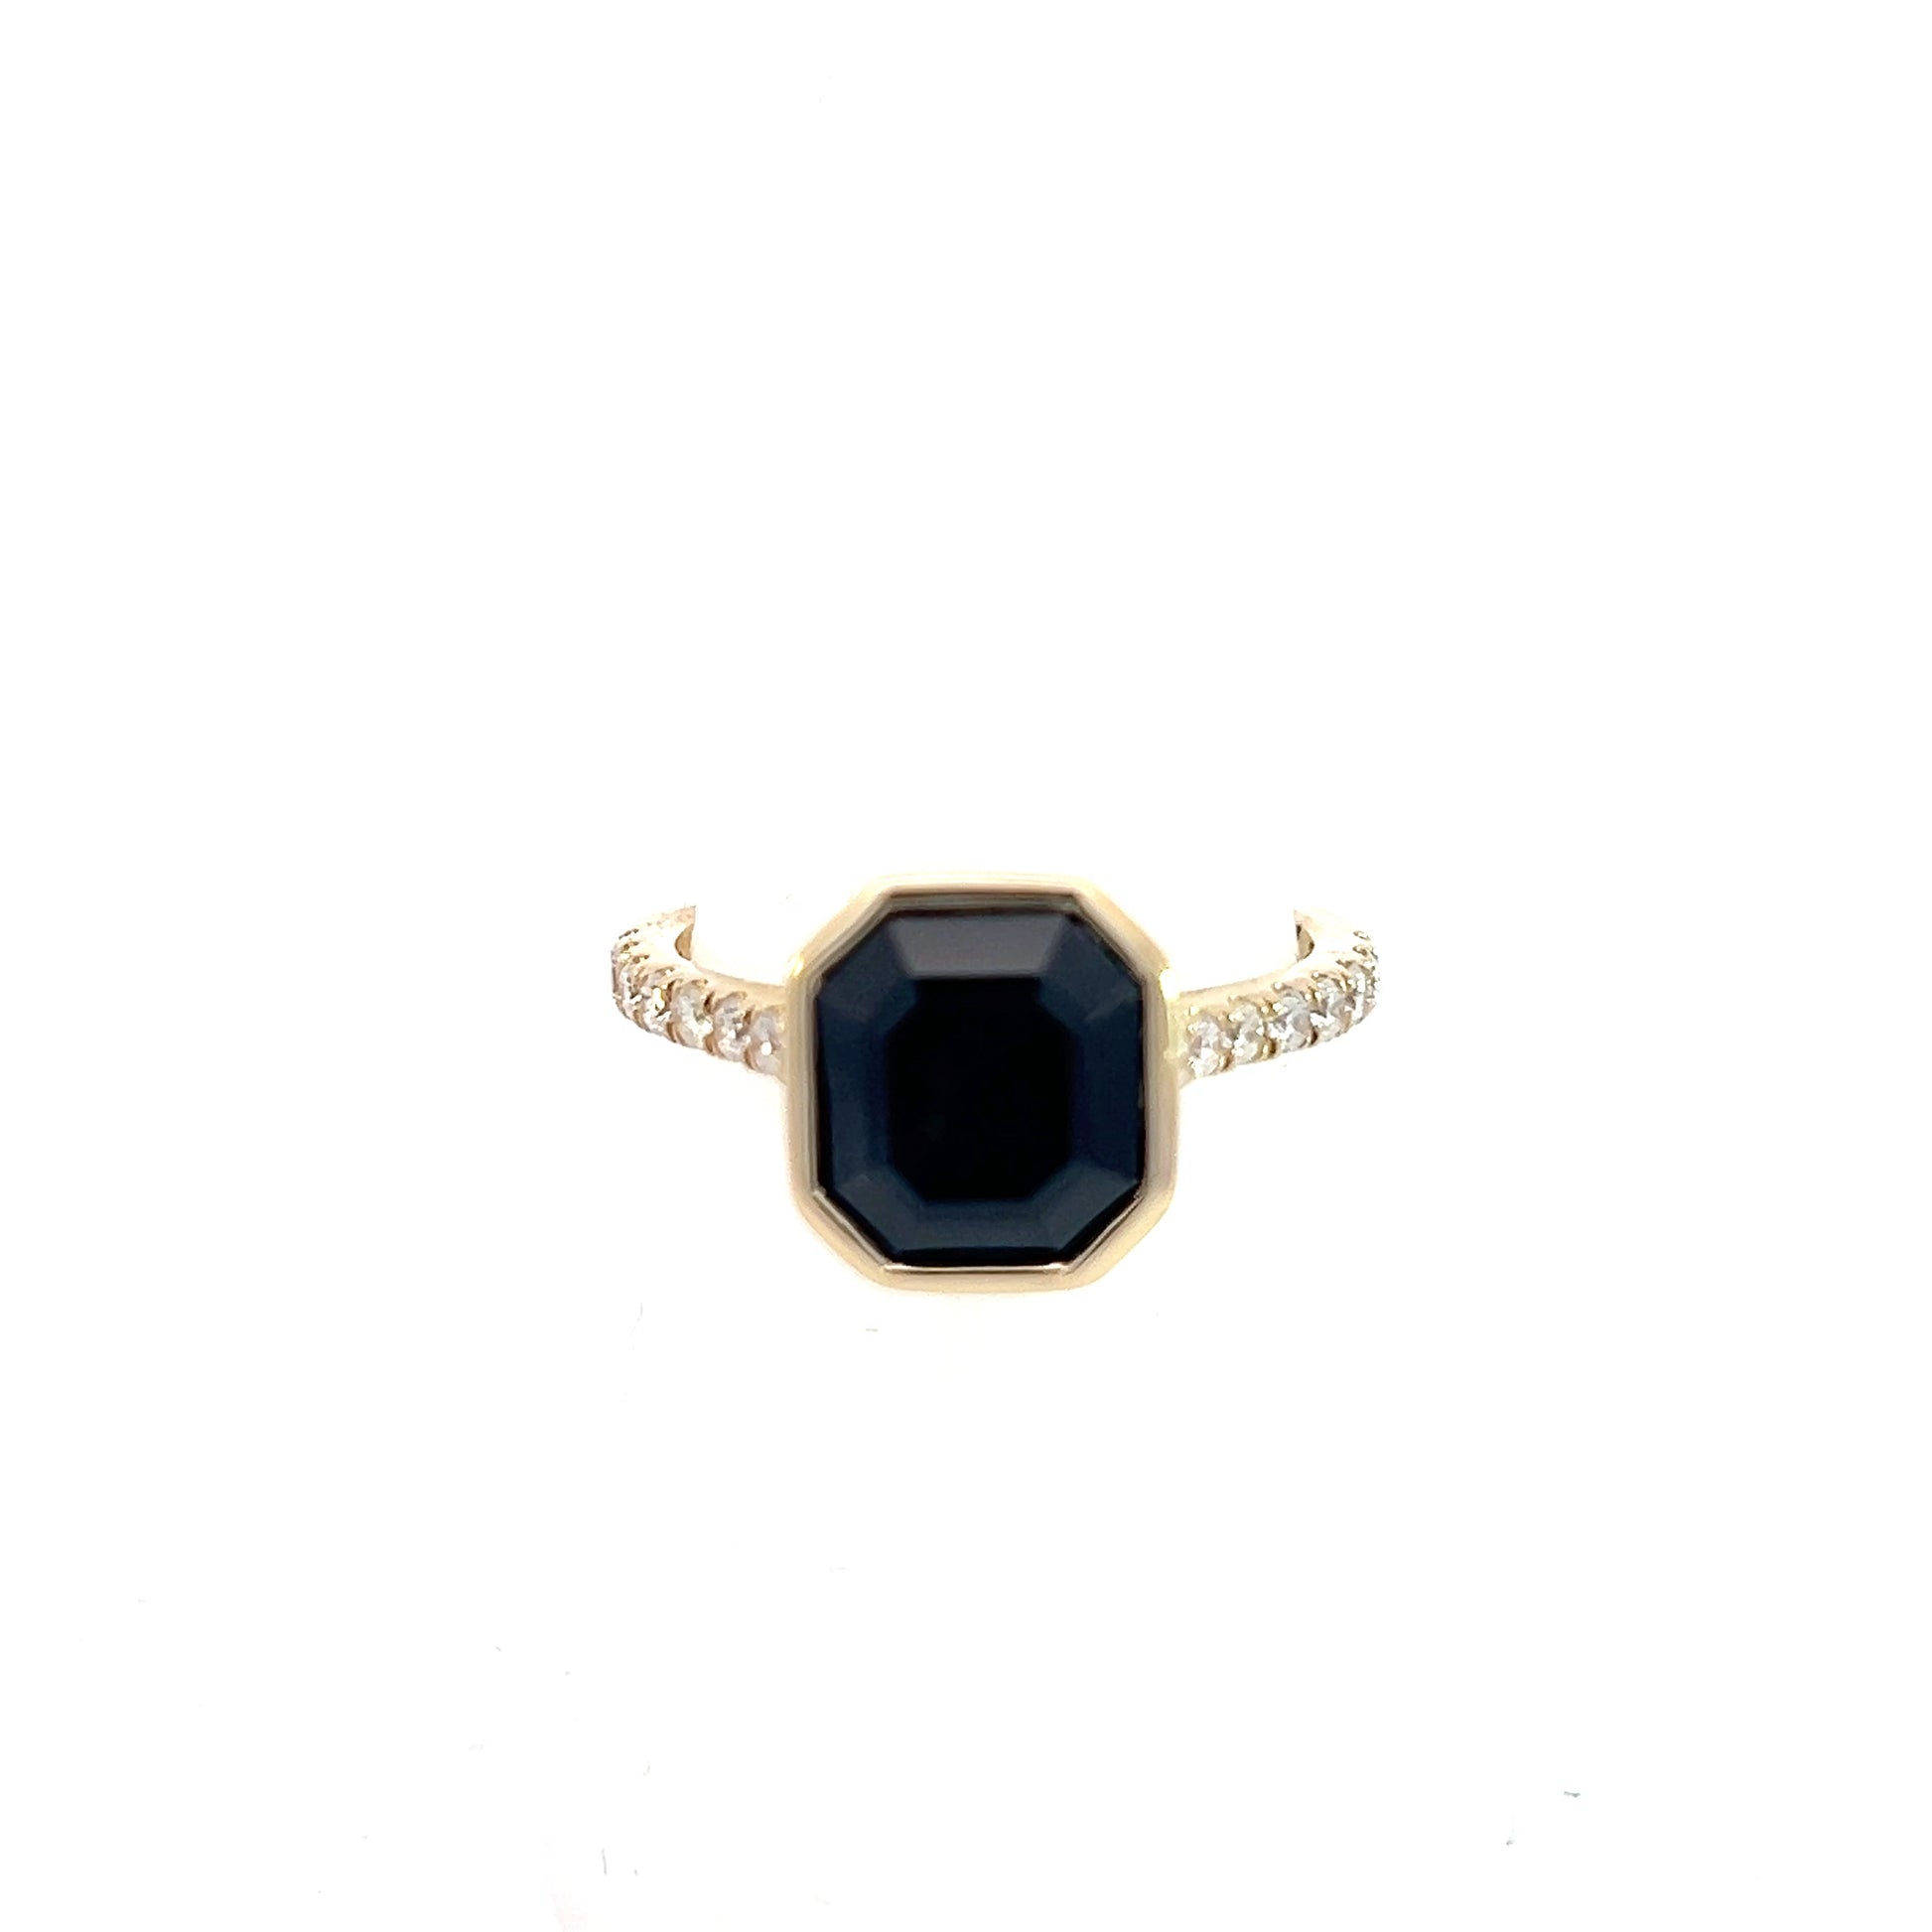 Natural Sapphire Diamond Ring 6.75 14k Yellow Gold 4.65 TCW Certified $3,950 310597